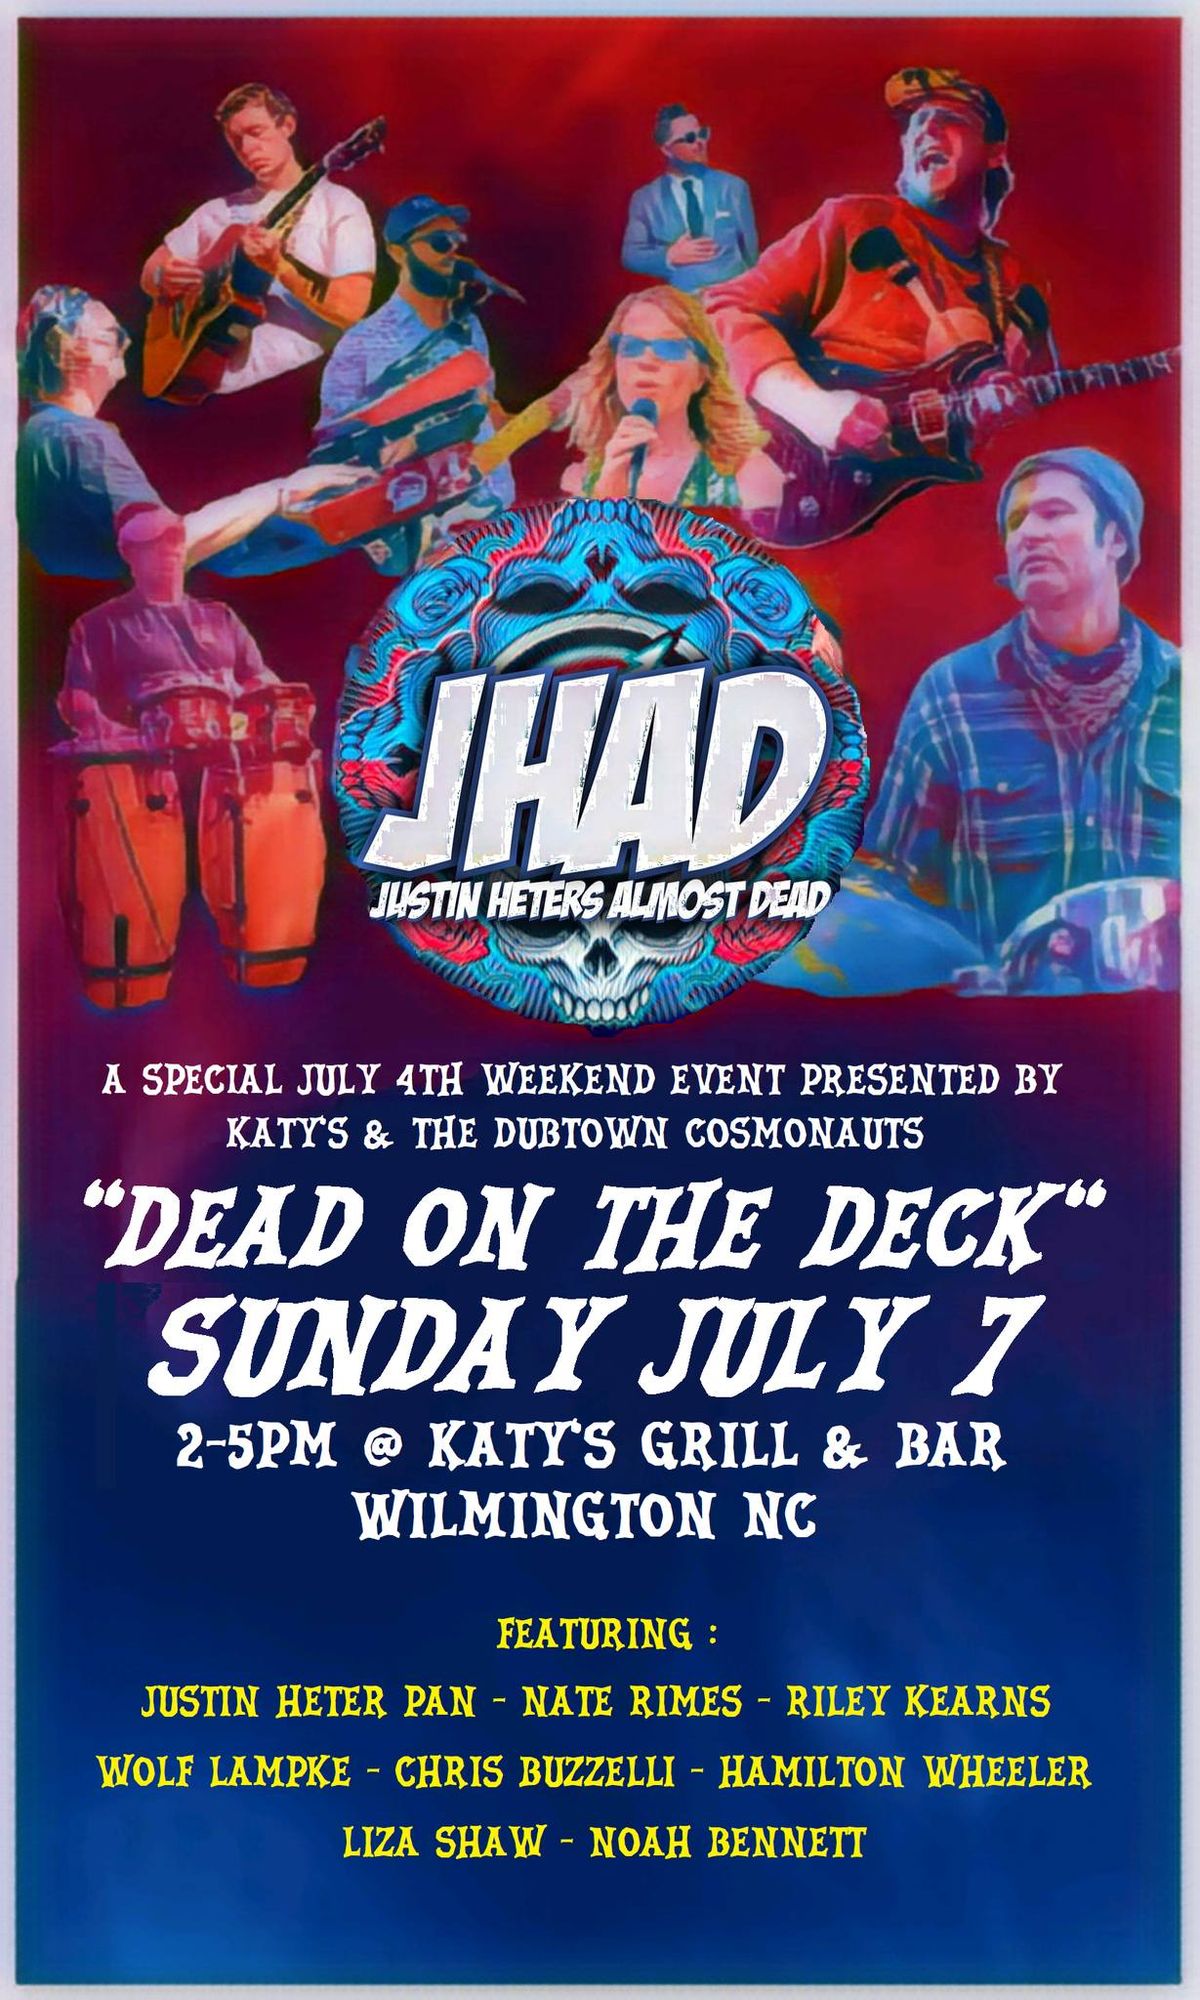 JHAD (Justin Heter's Almost Dead) play "Dead on the Deck" at Katy's Grill & Bar